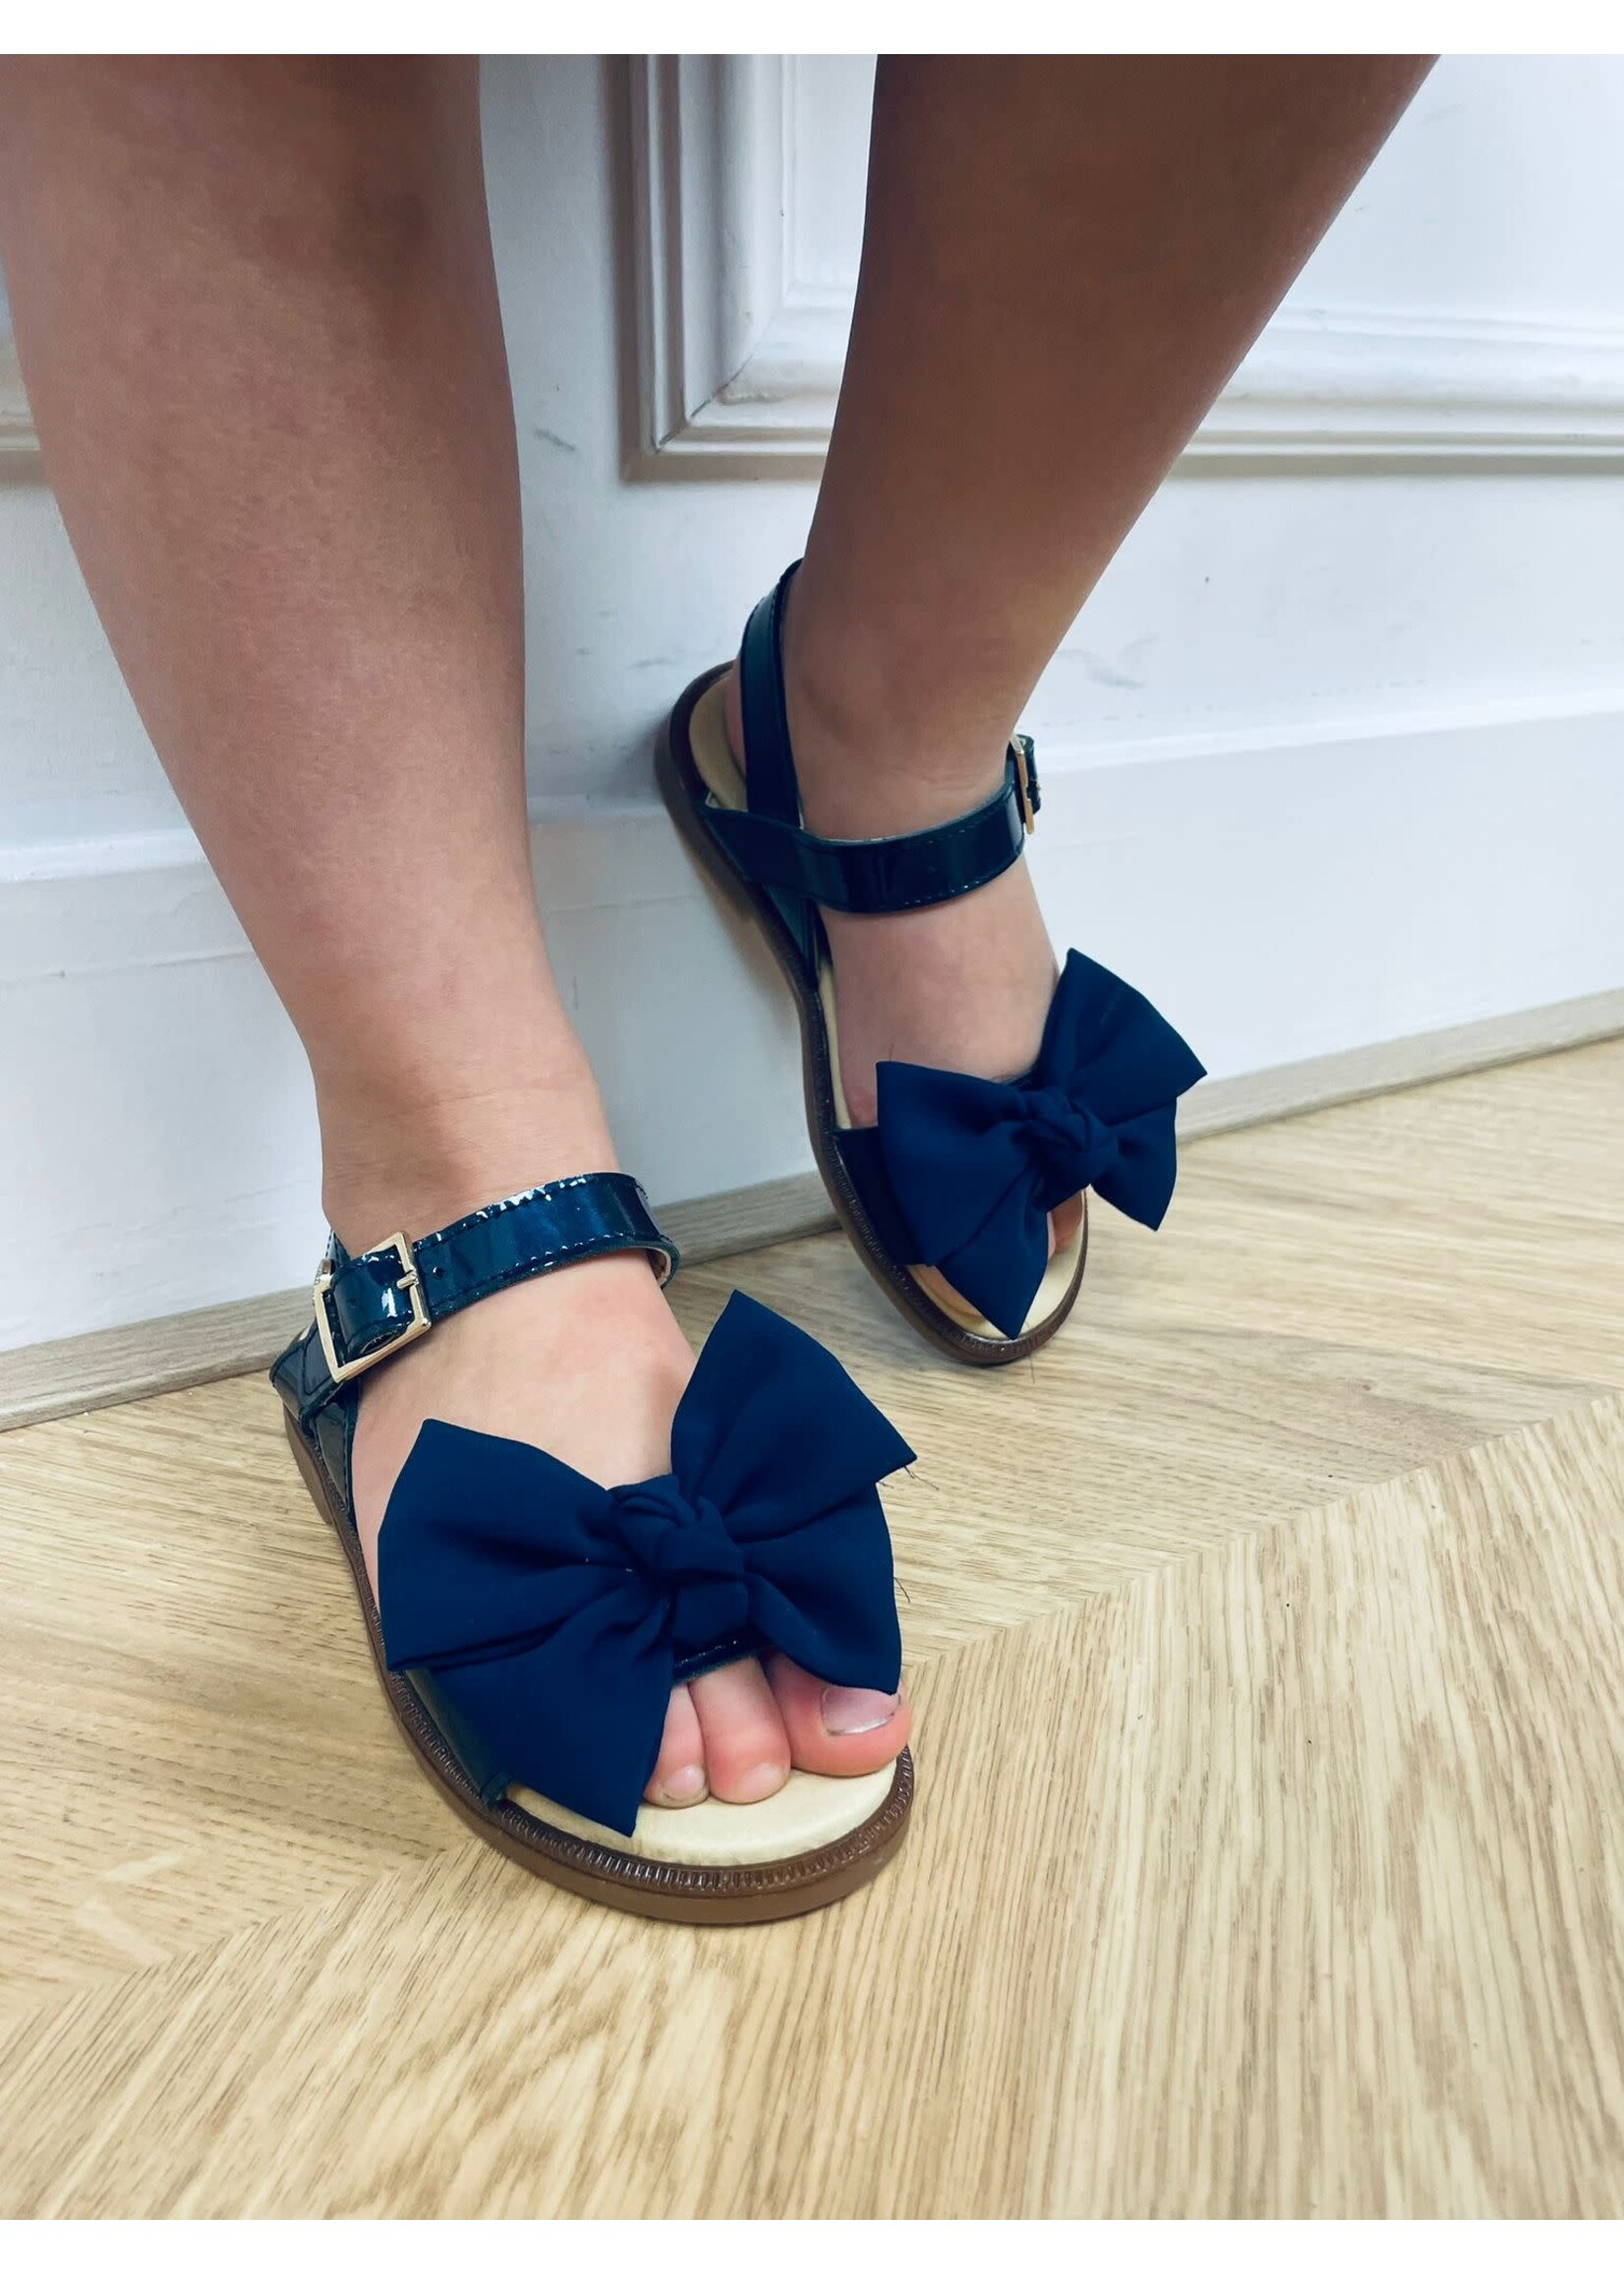 Andanines Sandals Bow Navy - Andanines